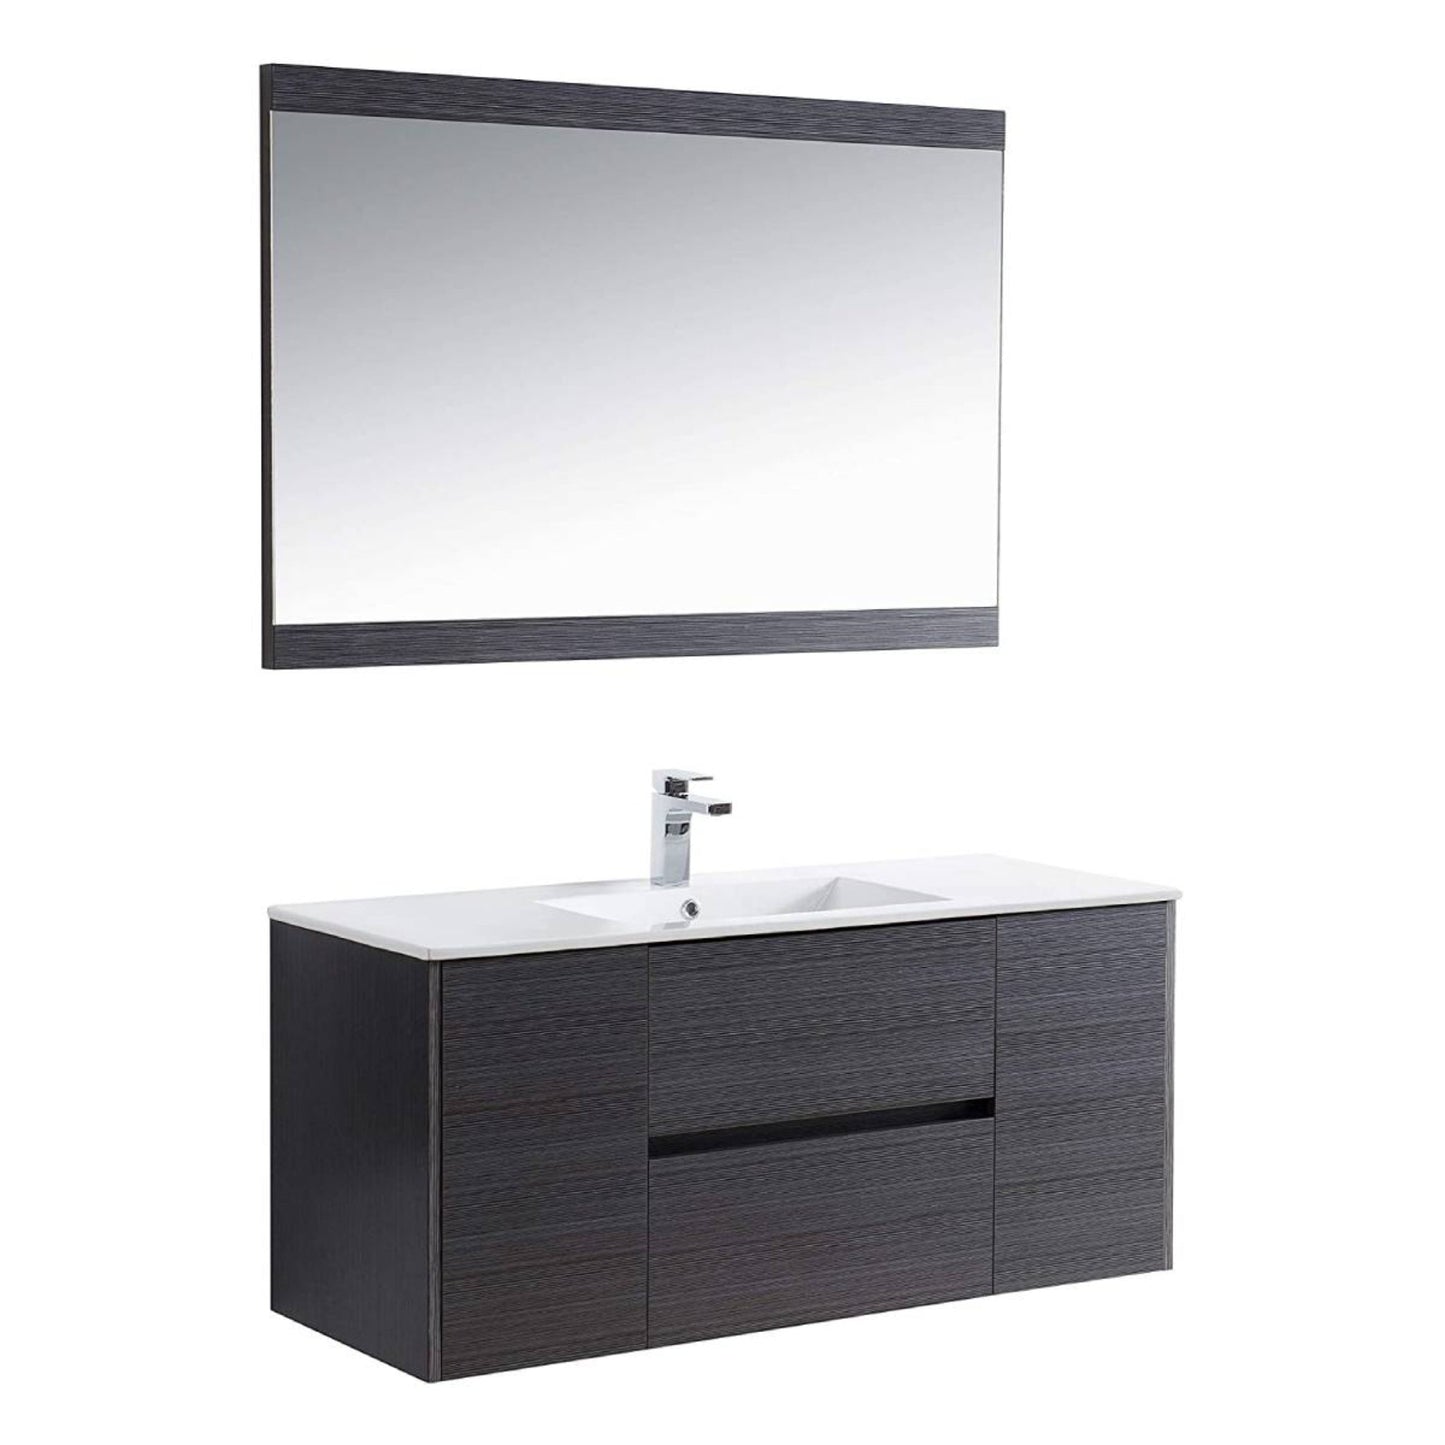 Blossom Valencia 48" 2-Door 2-Drawer Silver Gray Wall-Mounted Vanity Set With Ceramic Top, Integrated Single Sink and Mirror